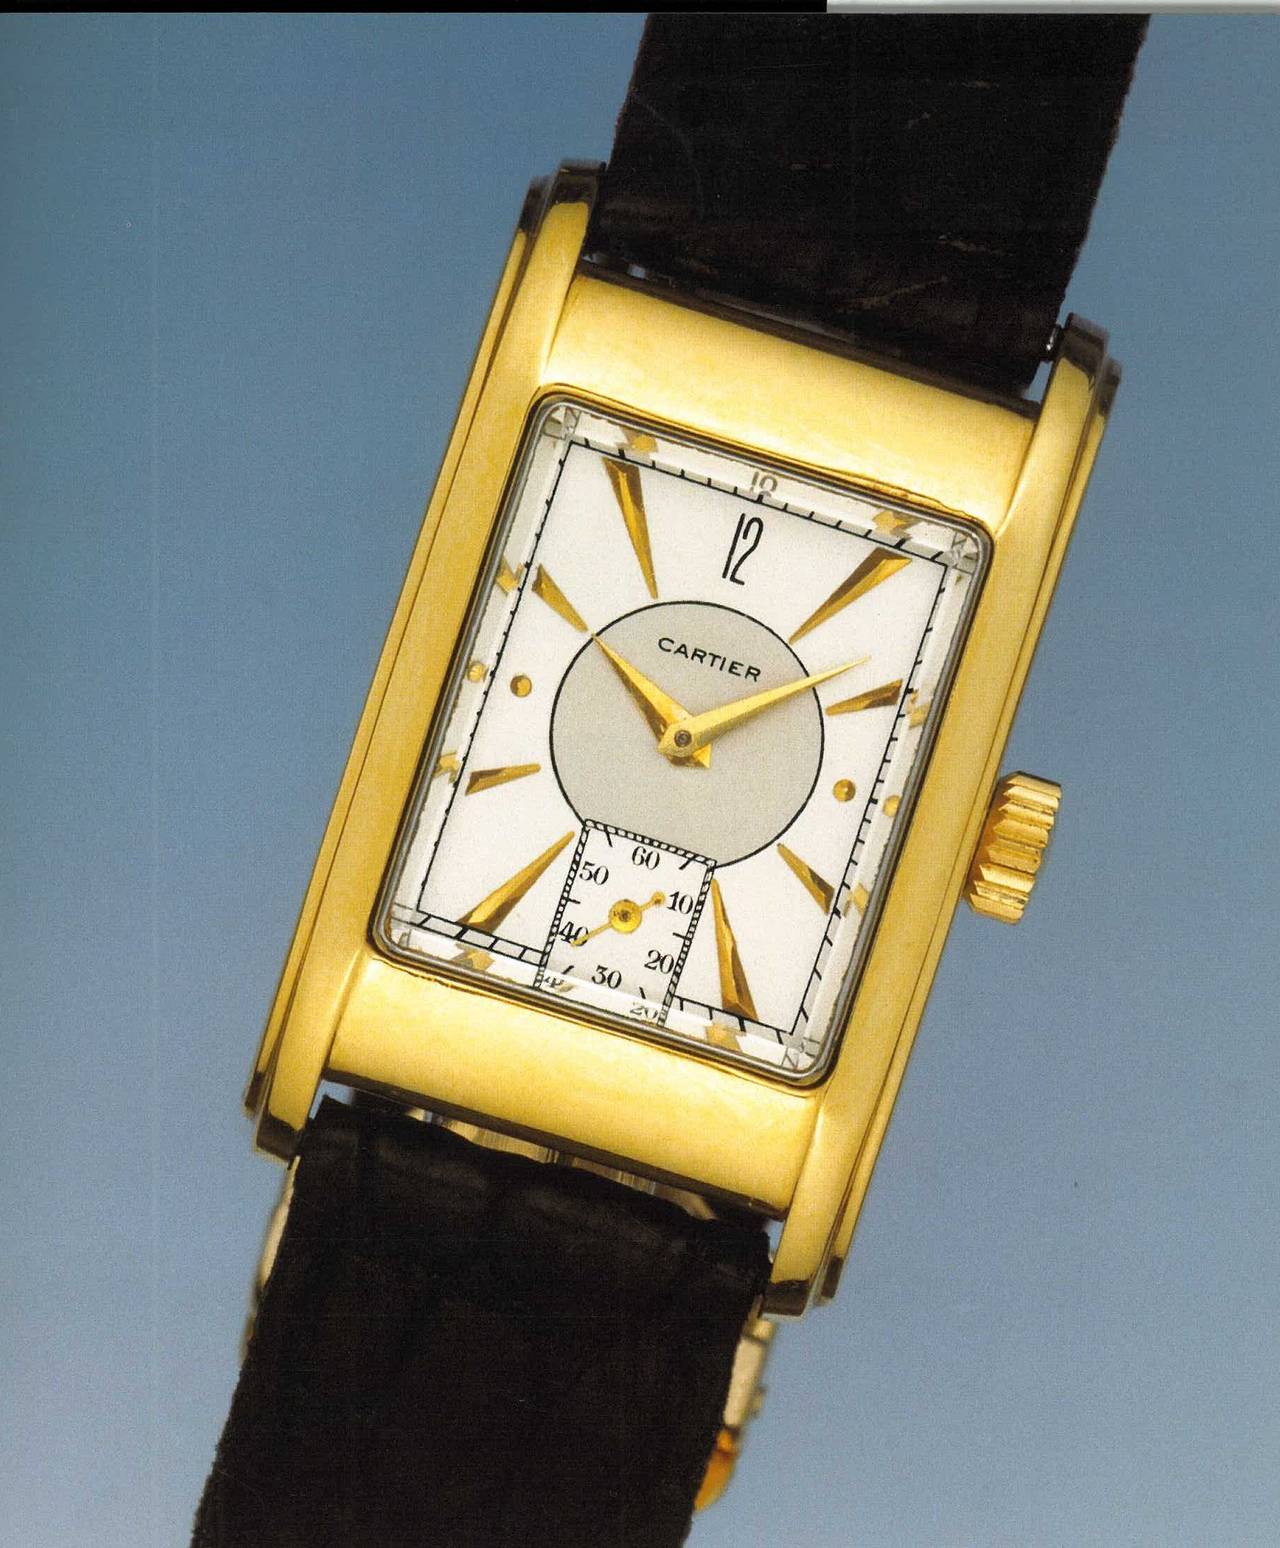 Cartier: The Tank Watch By Franco Cologni (Book) 3